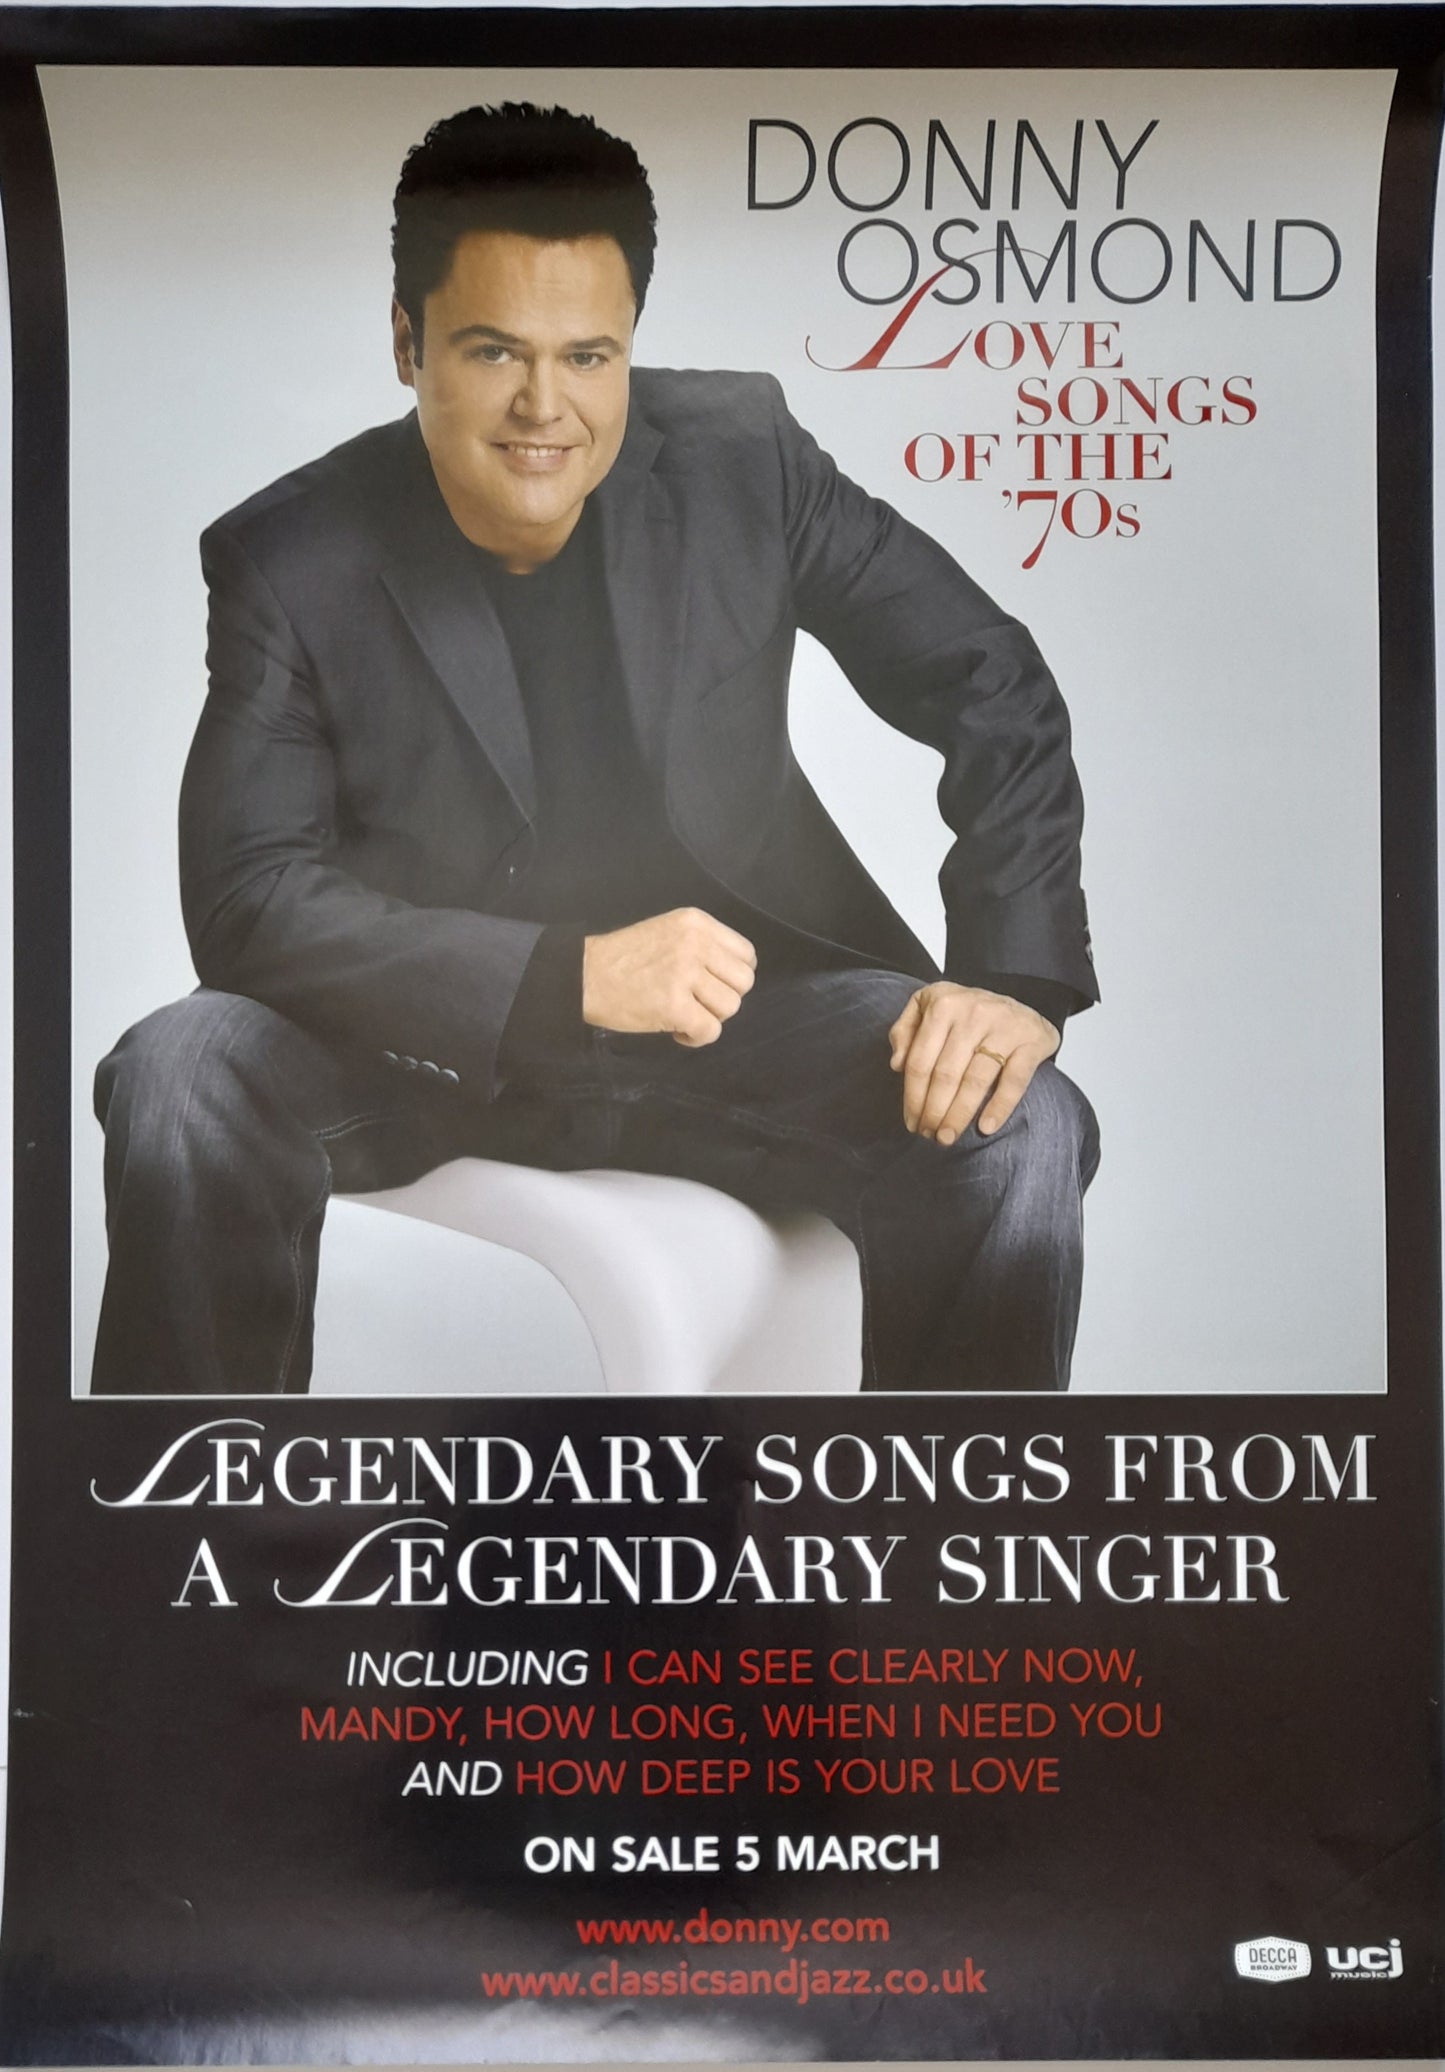 Donny Osmond Love Songs of the 70s CD Promotional Poster